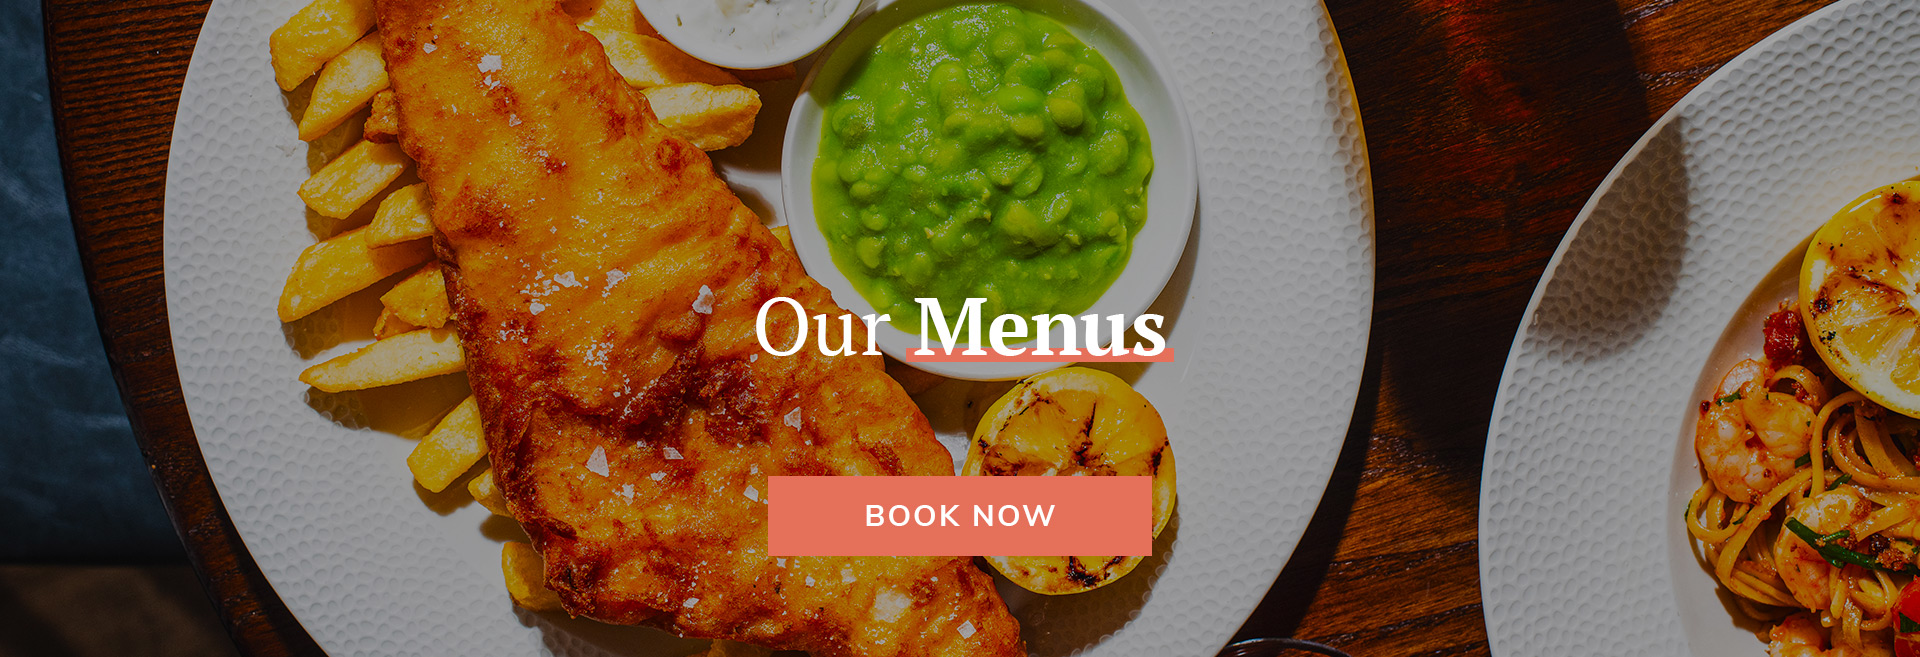 Book Now at The Maid Of Muswell